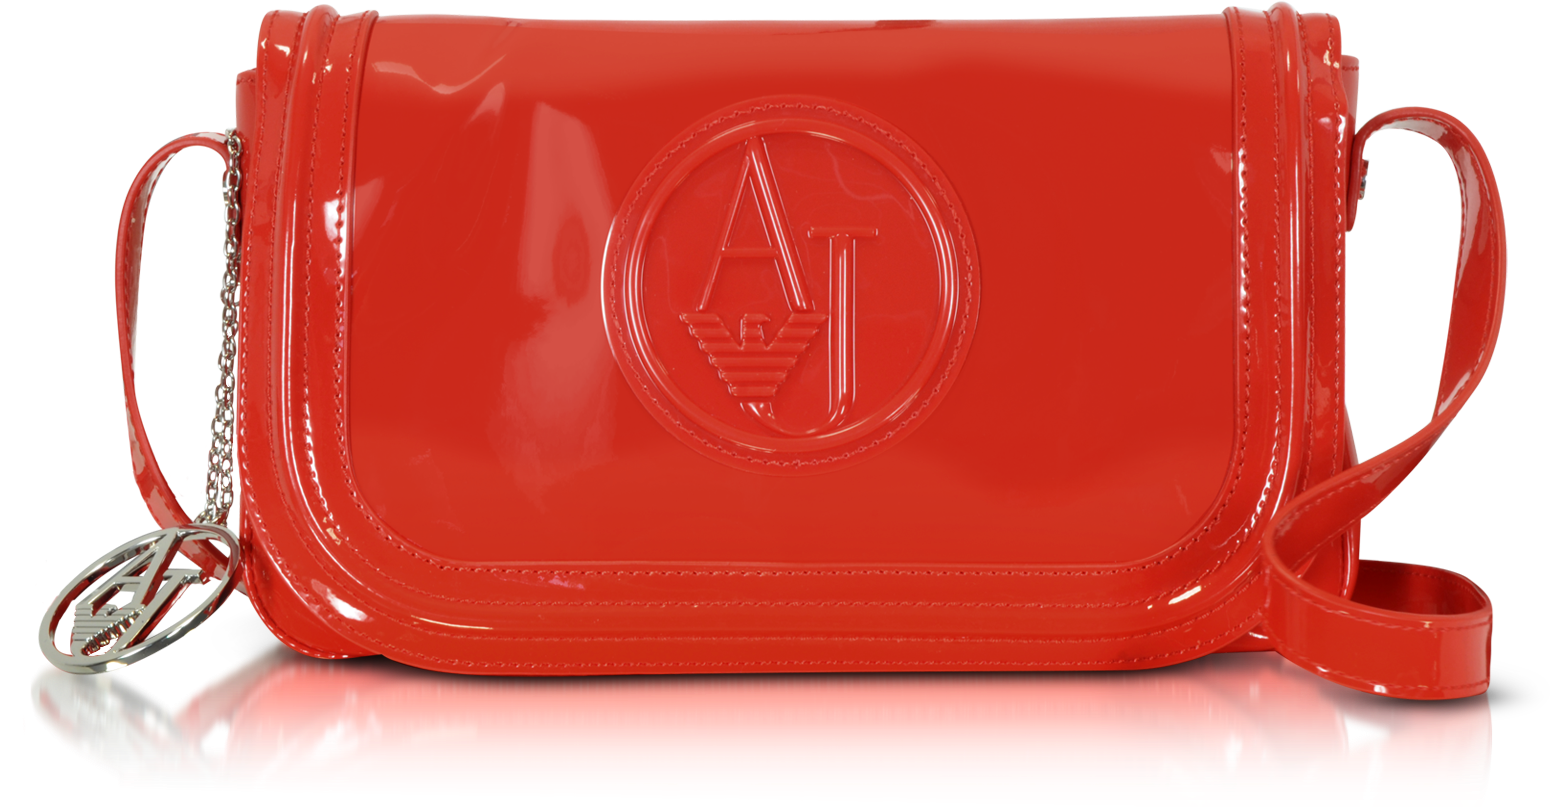 armani jeans red bag